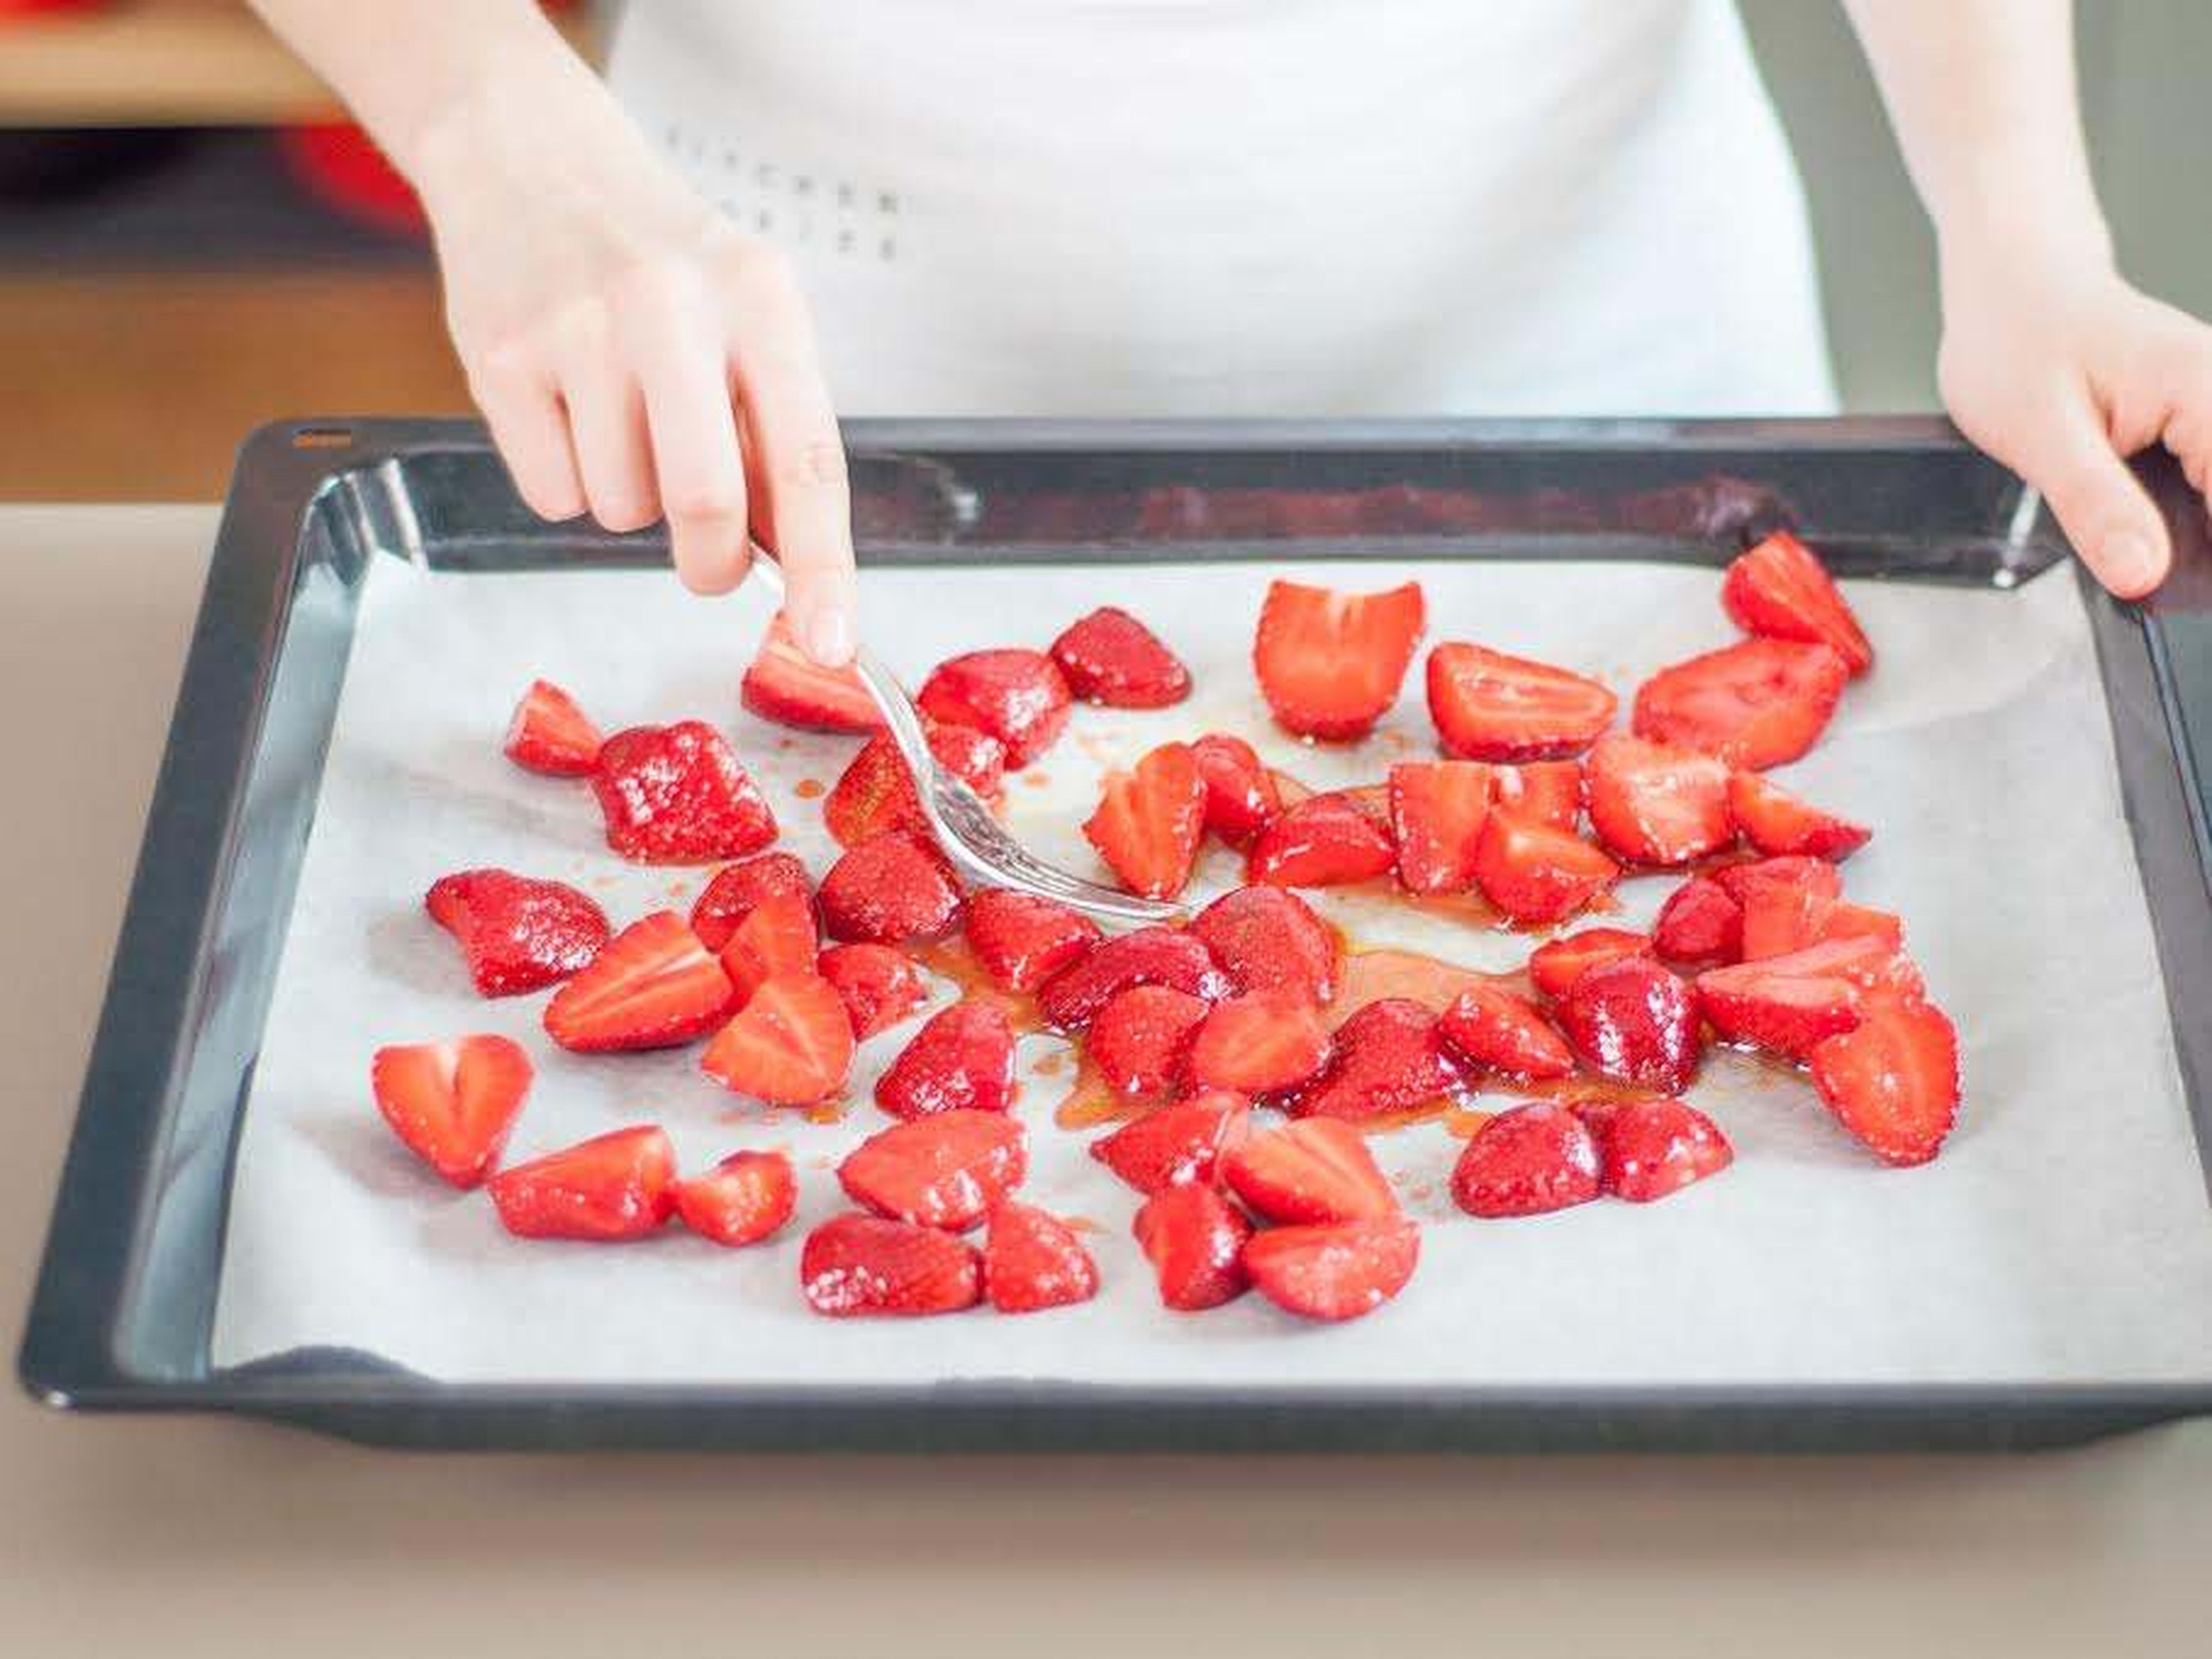 Transfer strawberries to baking sheet and arrange in a single layer. Roast strawberries for approx. 30 - 40 minutes at 190°C/375°F, or until juices thicken. Transfer berries back to mixing bowl, add some of the balsamic vinegar, and toss to coat. Set aside.